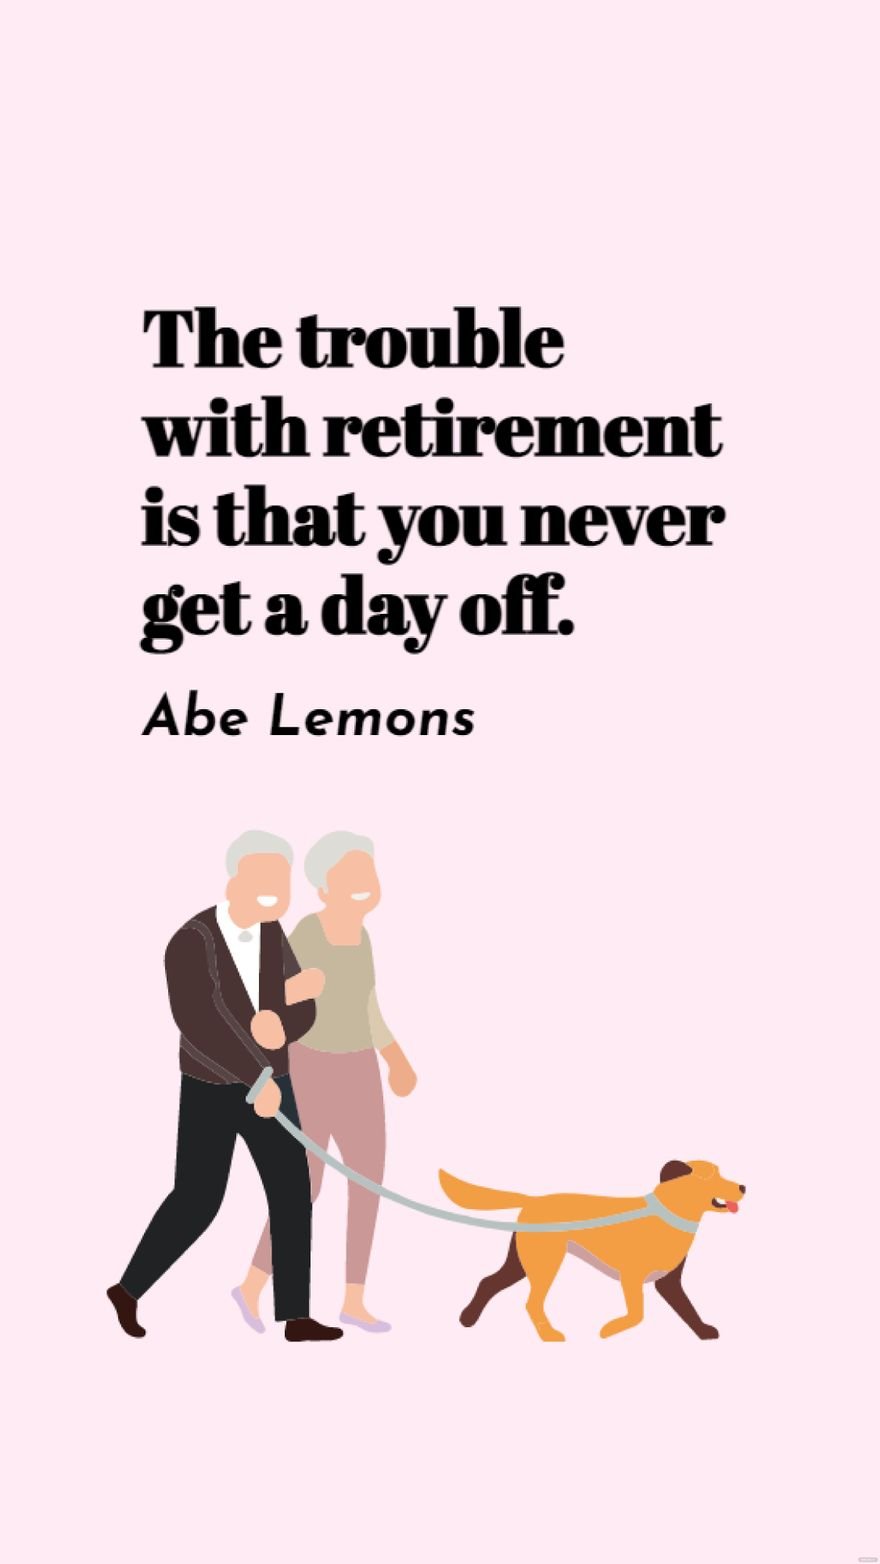 Abe Lemons - The trouble with retirement is that you never get a day off. in JPG